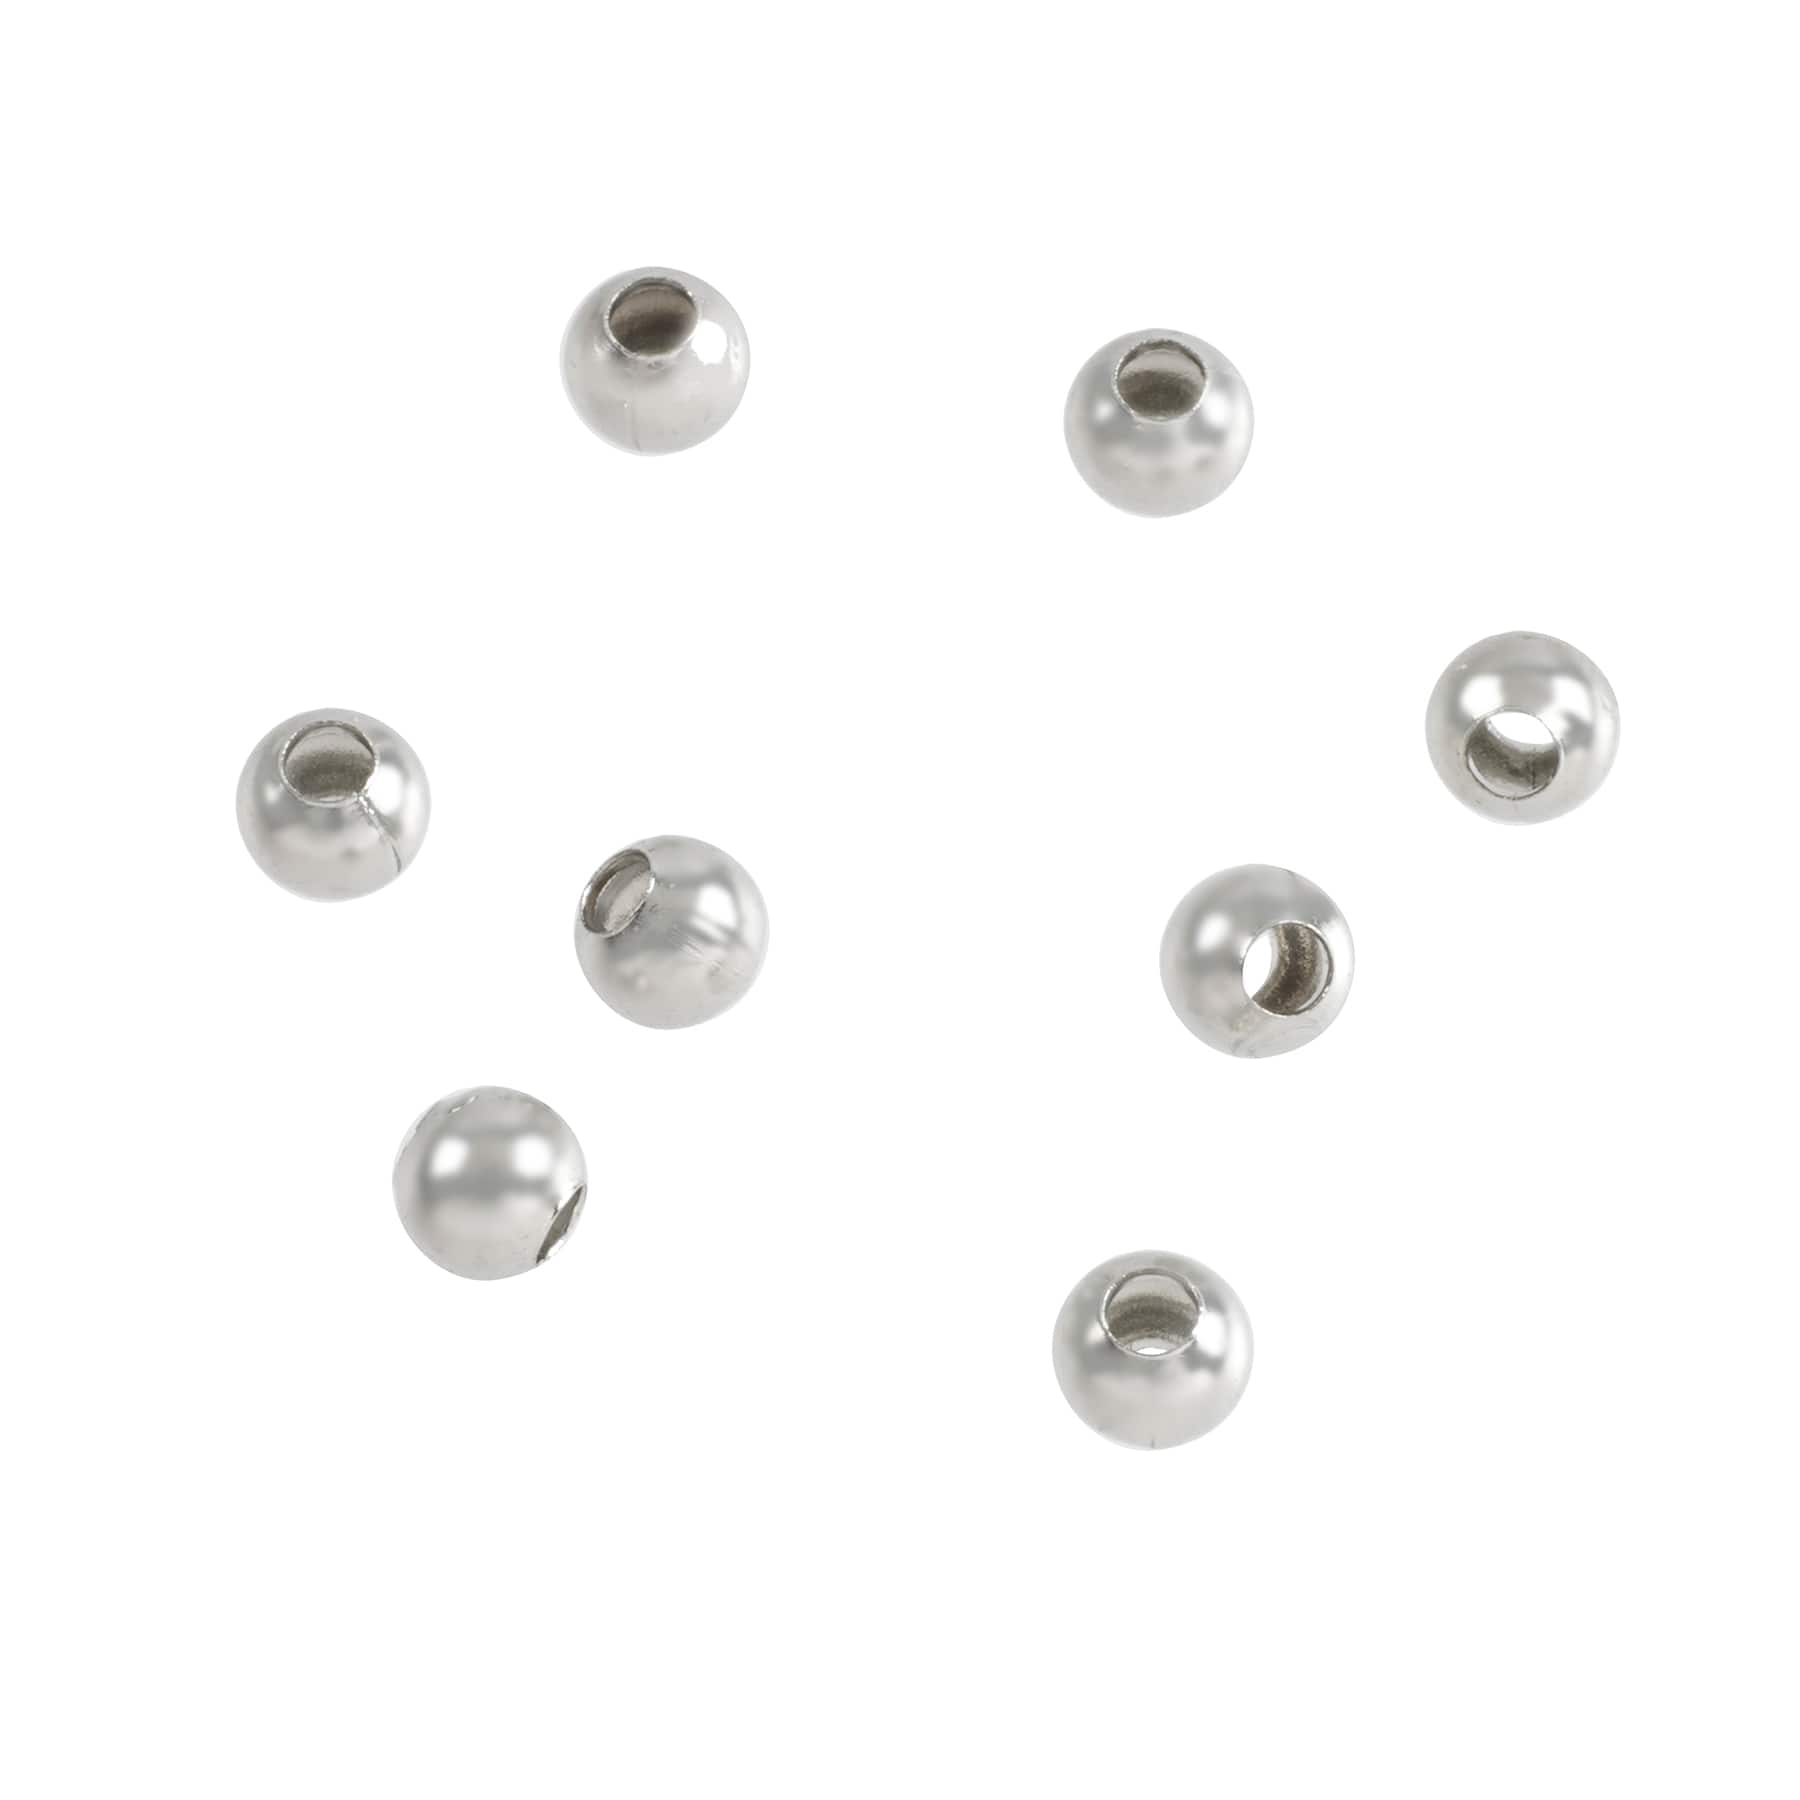  COHEALI 40 Pcs Stainless Steel Beads Charm Bracelet Spacers  Stainless Steel Spacer Beads Rondelle Beads Charm Spacer Beads Charm  Spacers Beaded Bracelets Beads Bracelet Metal Material : Arts, Crafts &  Sewing